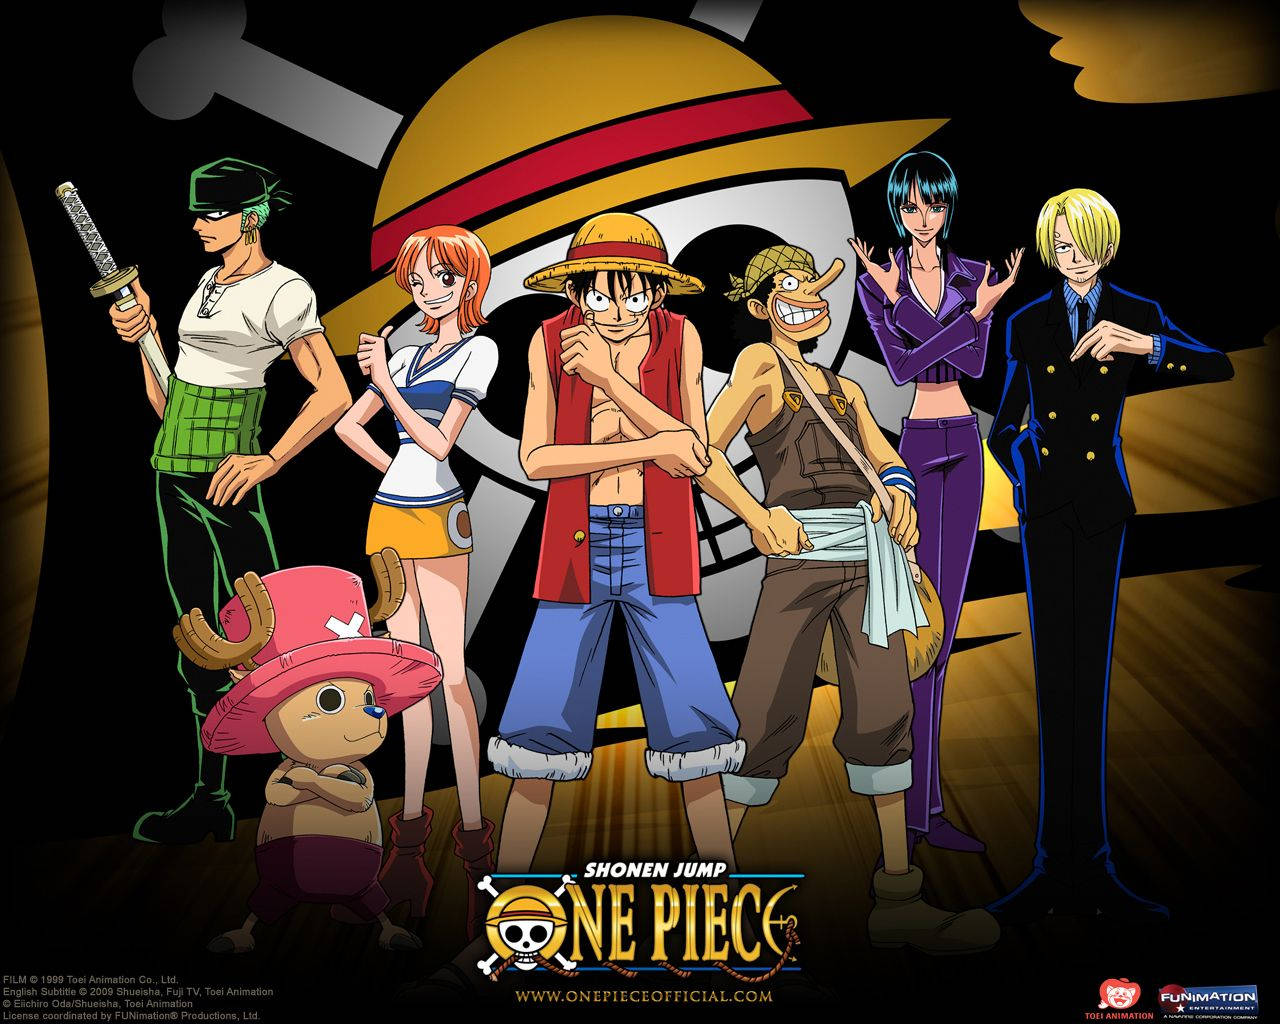 The Straw Hat Pirates Set Sail In Search Of Adventure